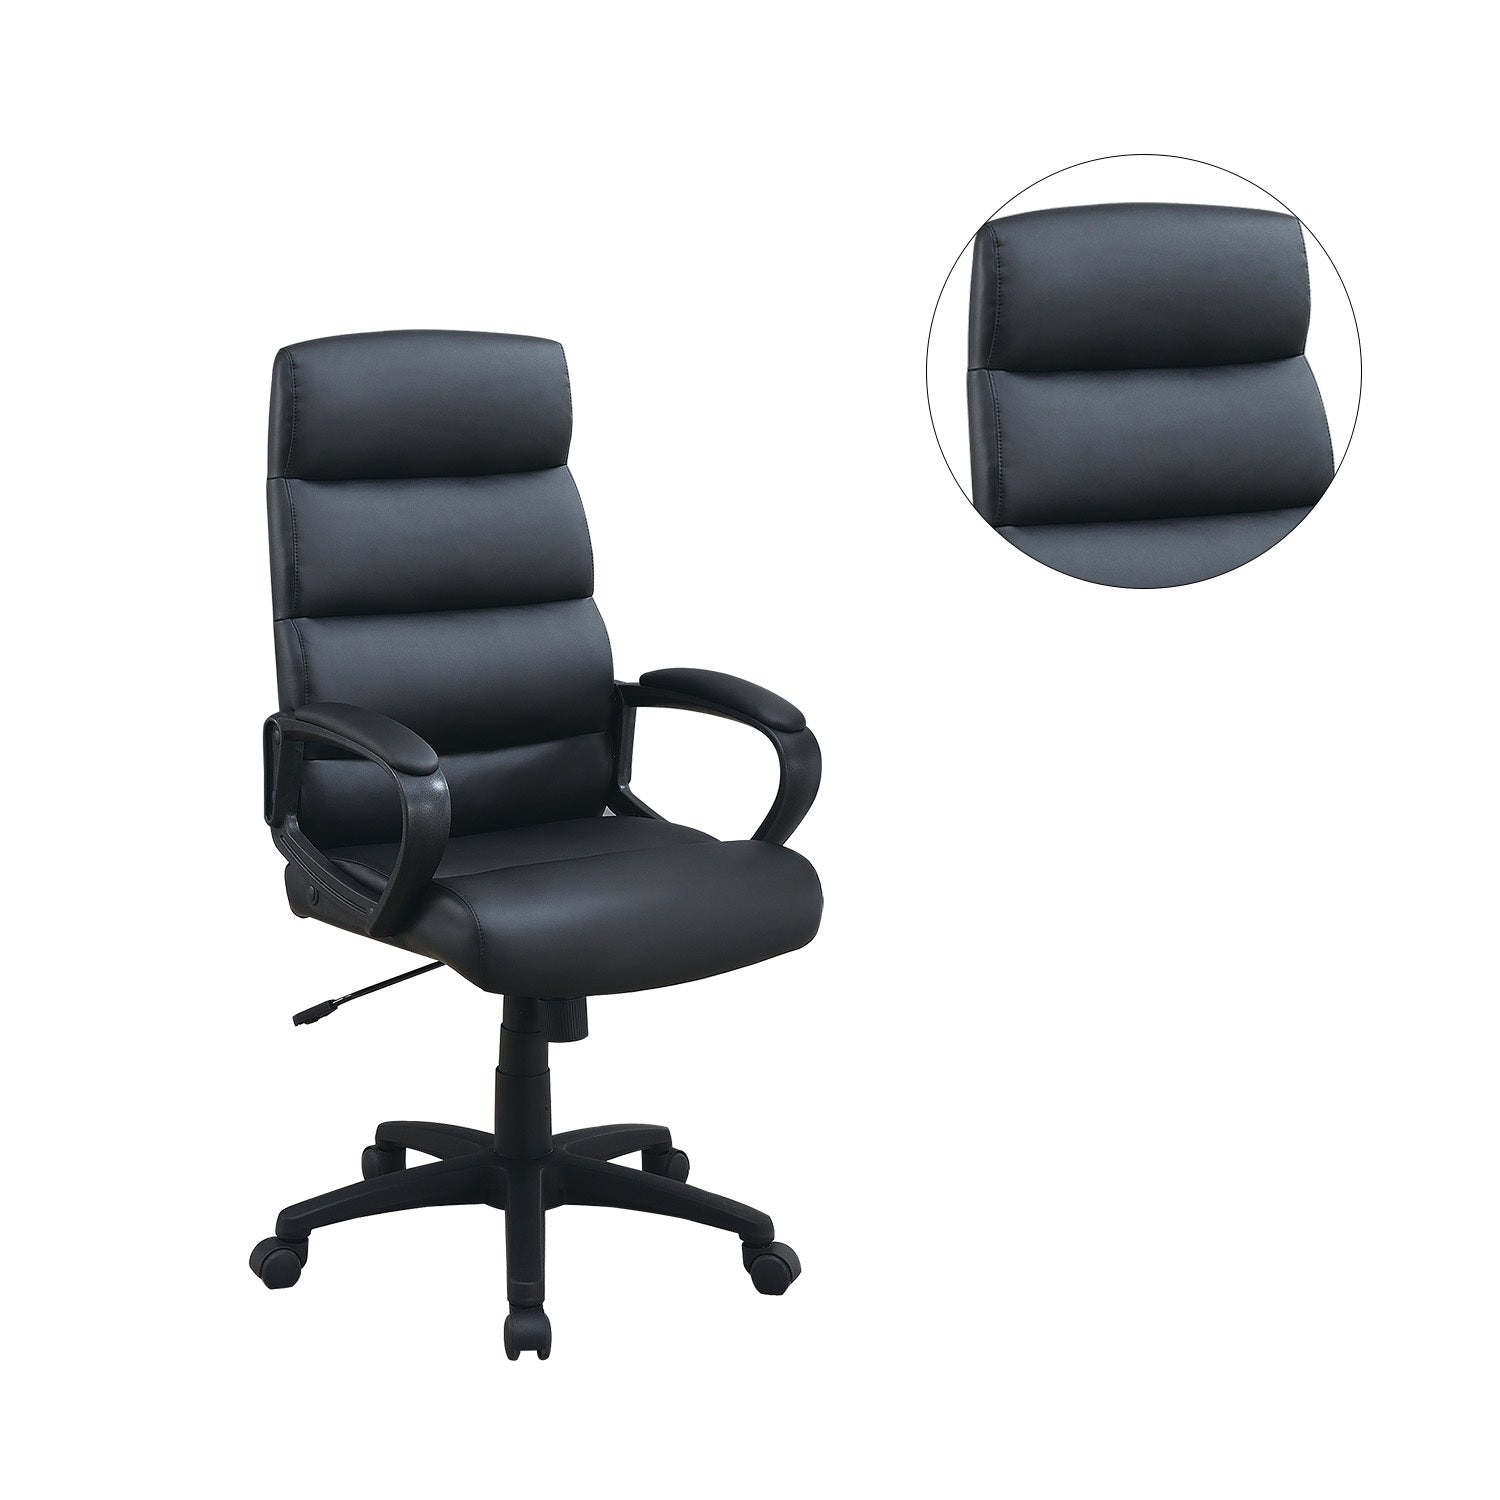 High-Back Adjustable Height Office Chair (Black)